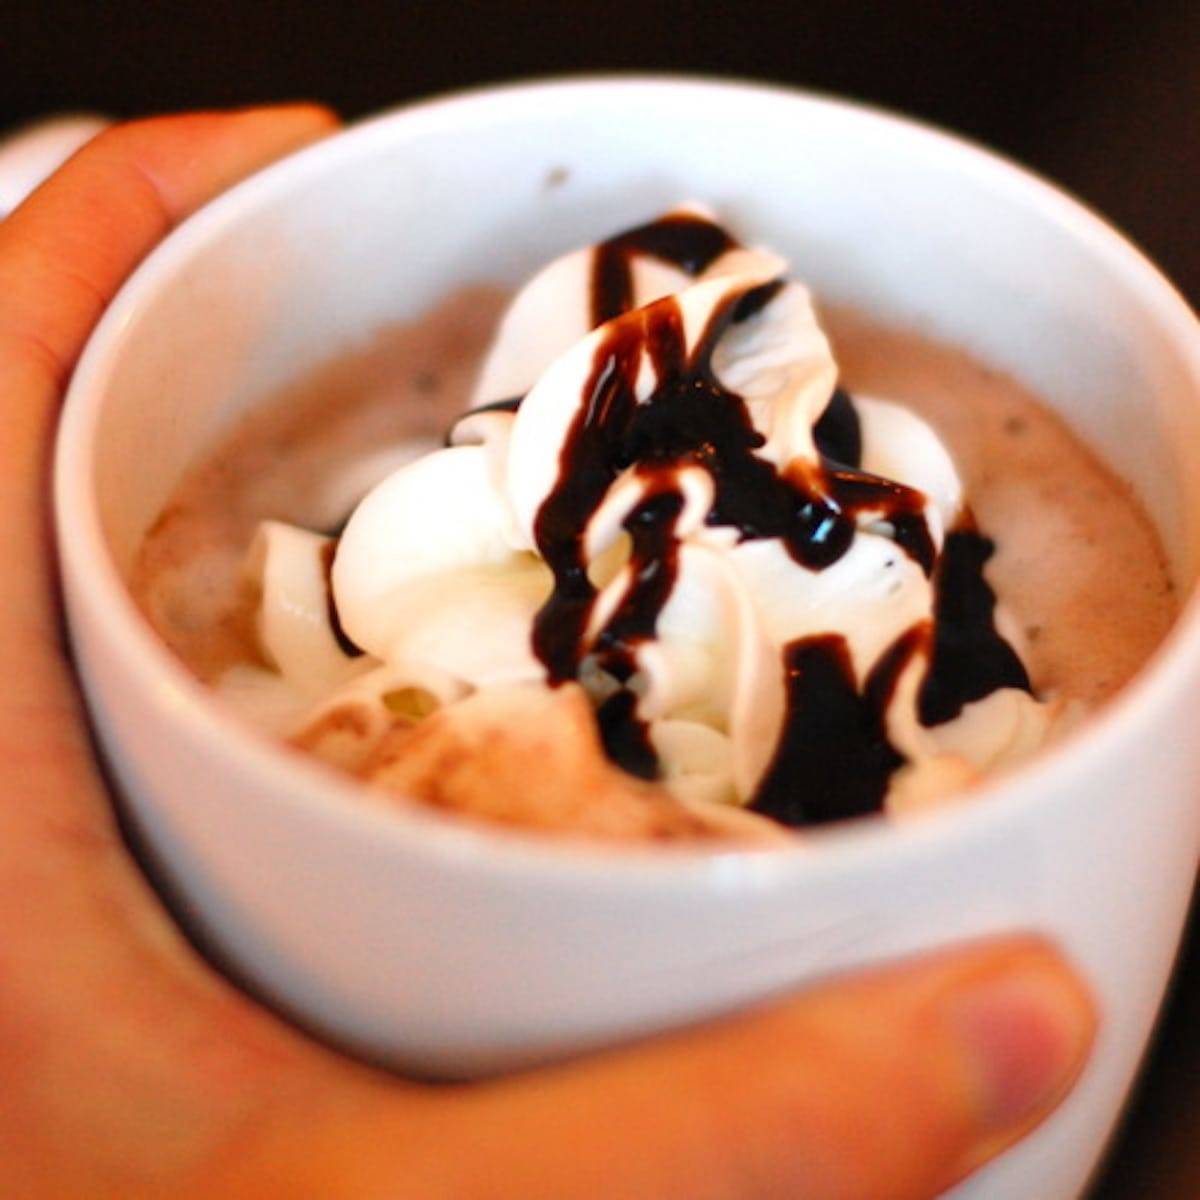 Hot Chocolate in a mug with whipped cream and chocolate syrup.